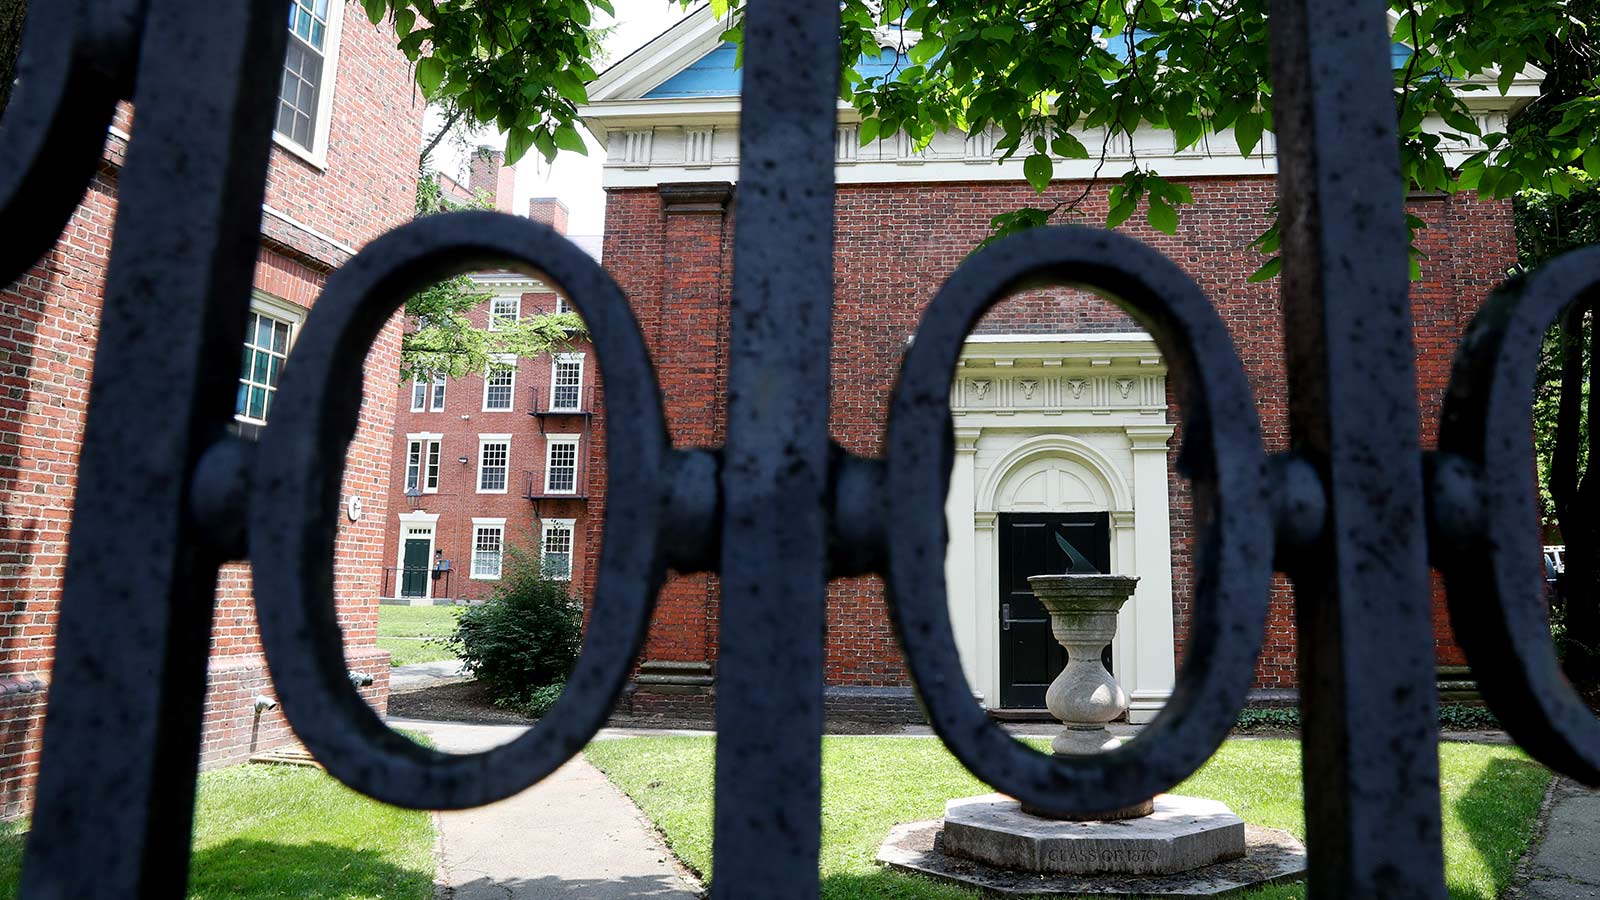 Harvard has remains of 7,000 Native Americans and enslaved people, leaked report says